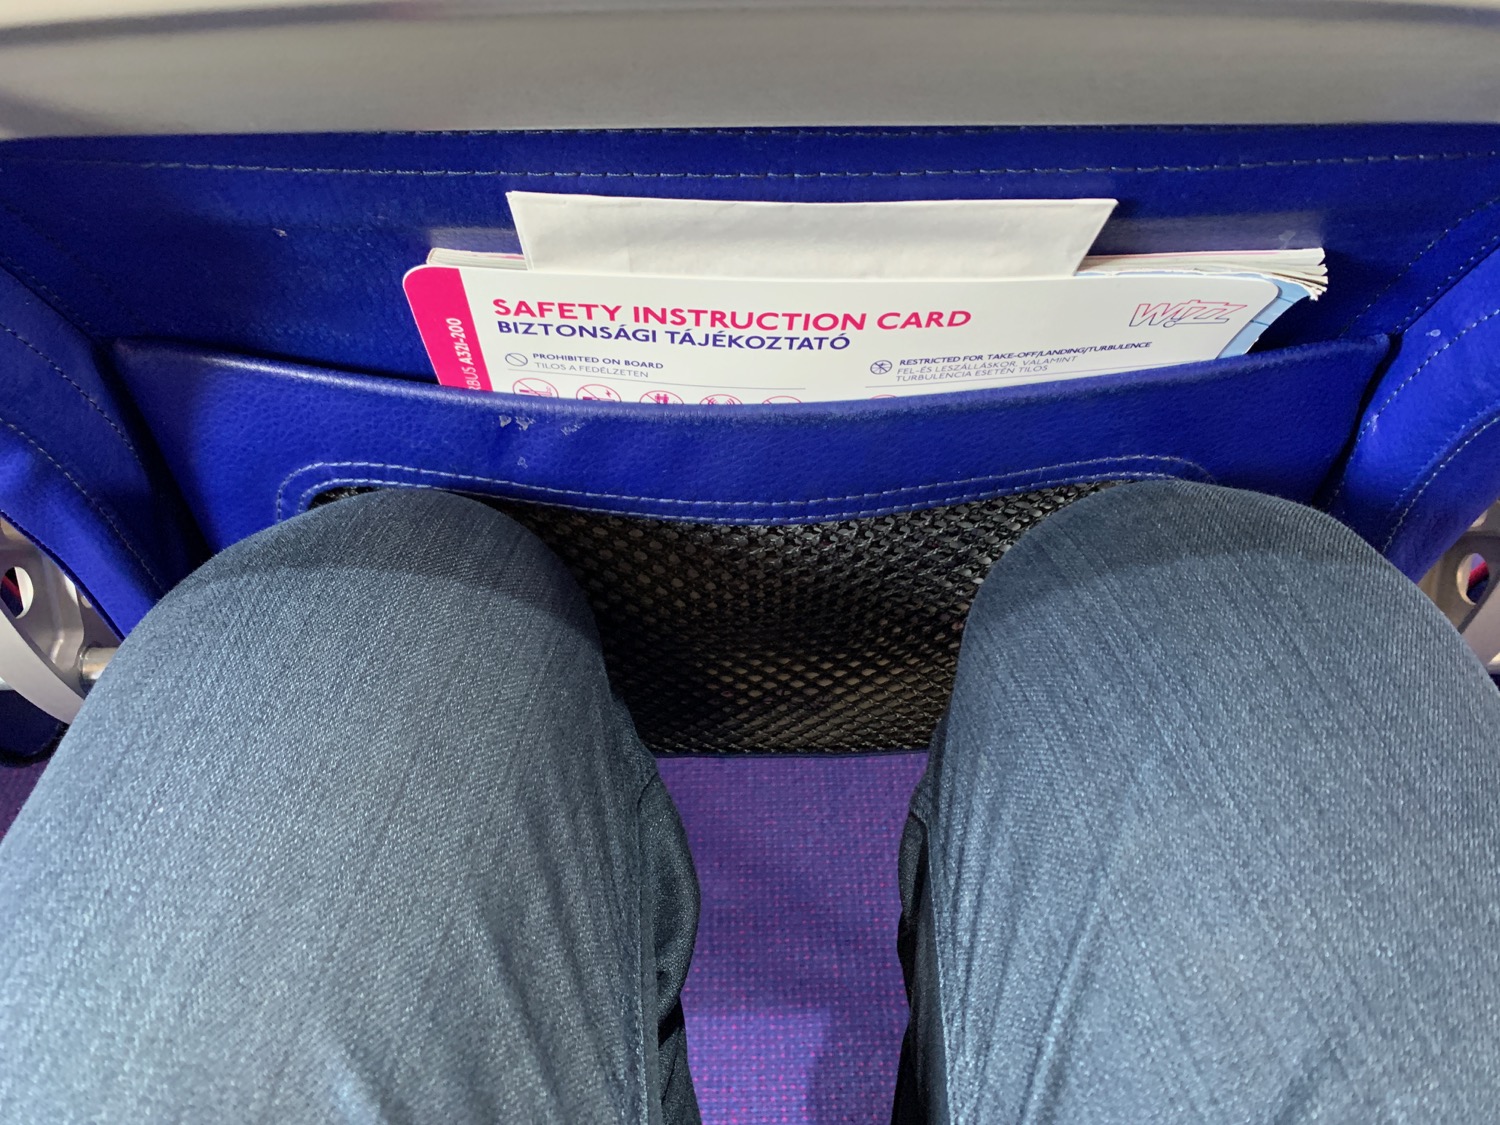 a person's legs in a blue bag with a safety instructions